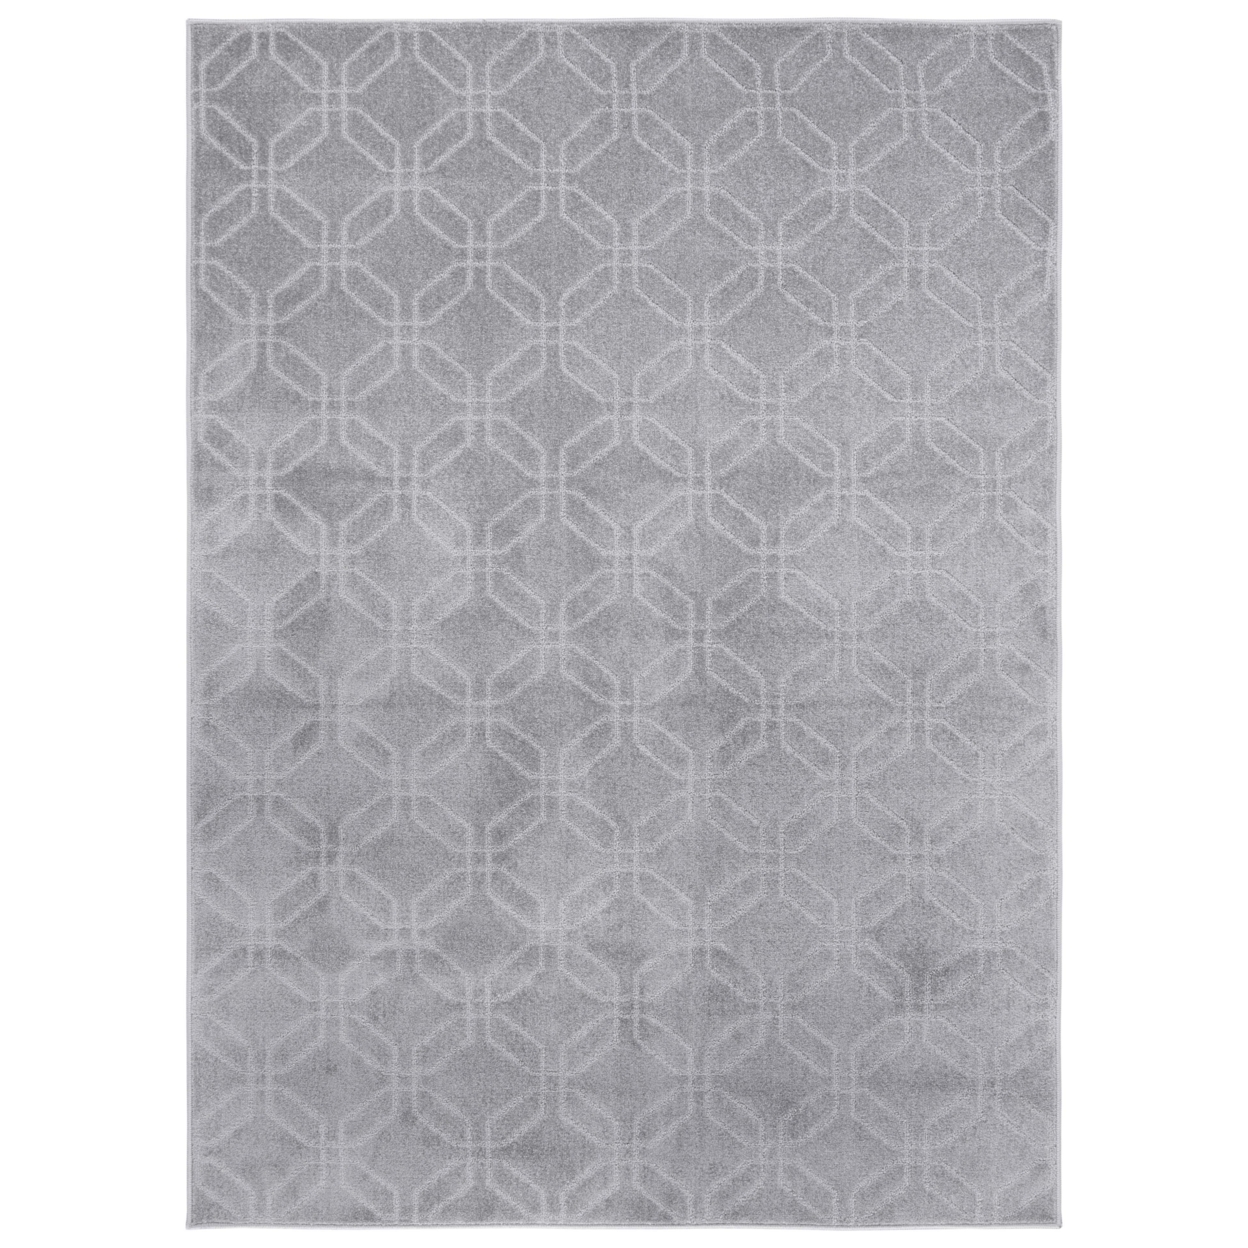 Safavieh PNS406F Pattern And Solid Grey - Dark Grey / Ivory, 5'-3 X 7'-6 Rectangle